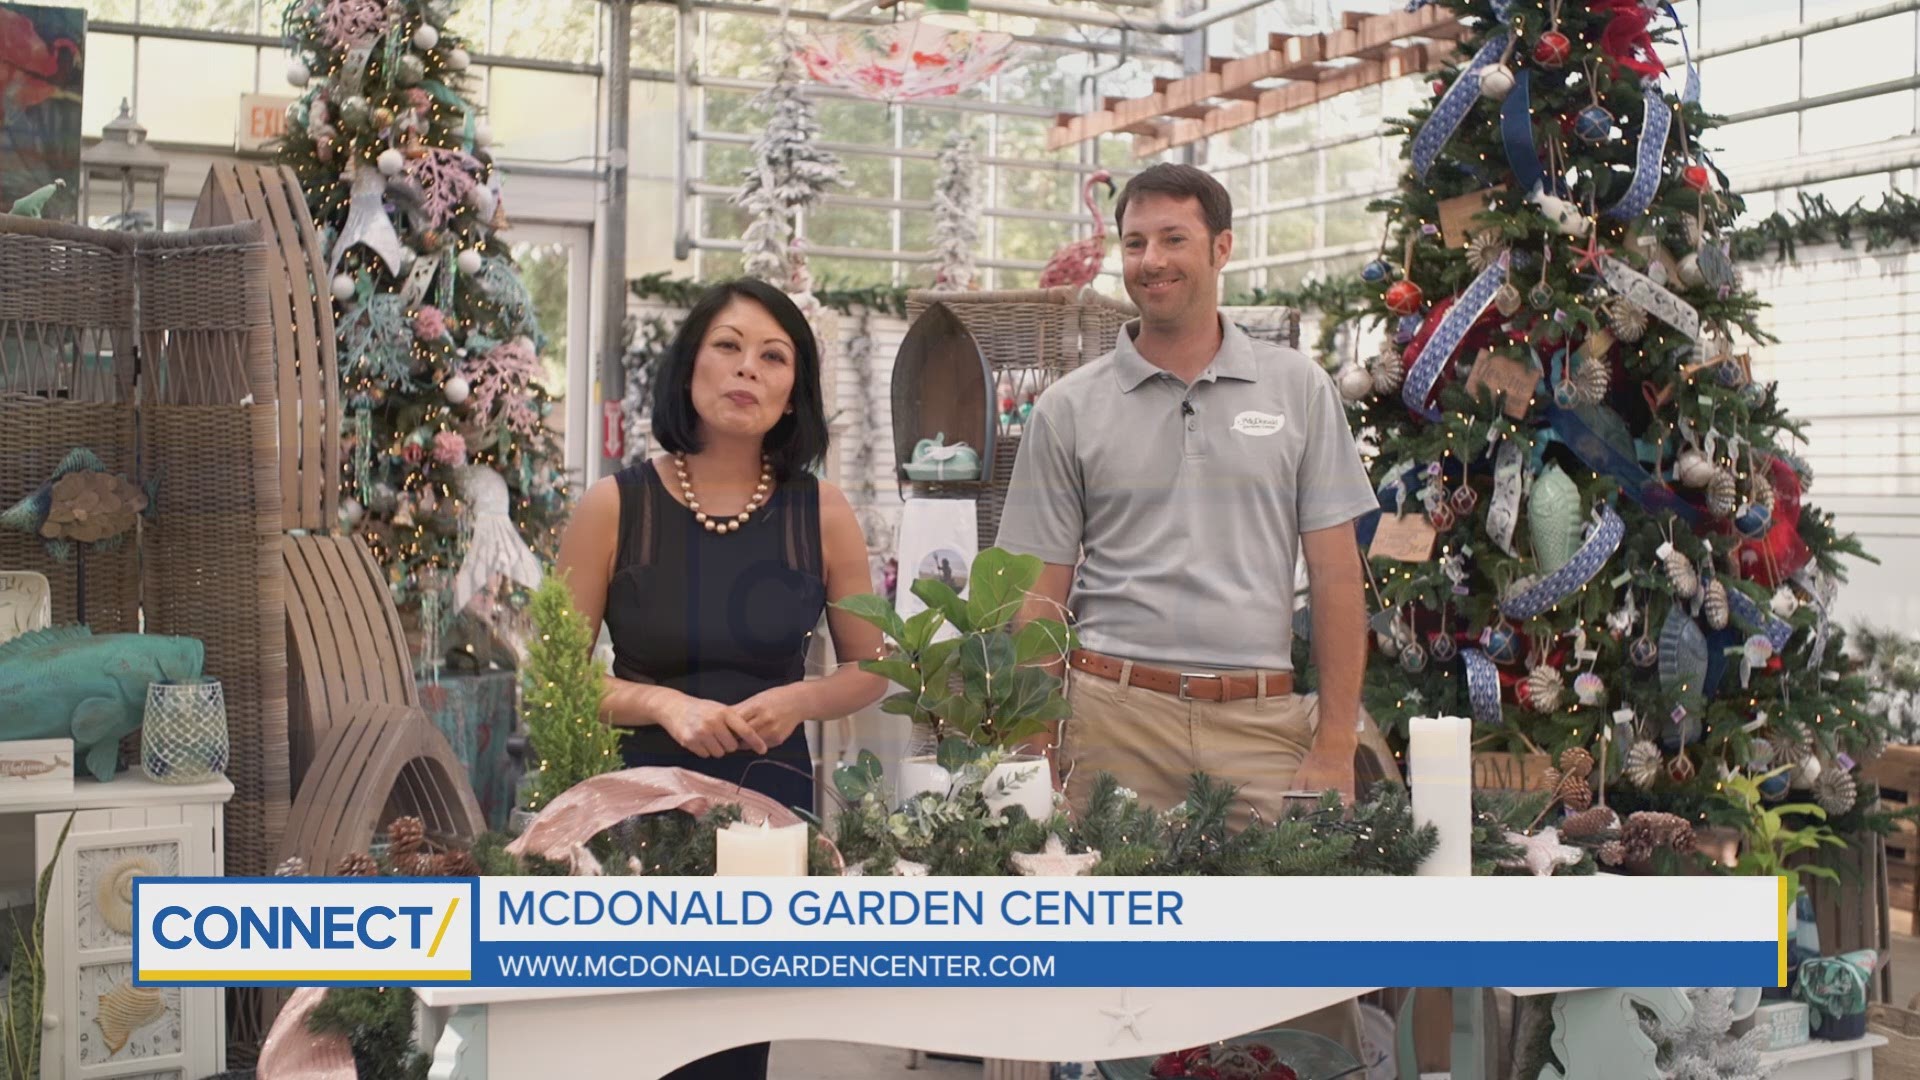 'Tis the season...FOR DECORATIONS!  McDonald Garden Center gave us some holiday decorating tips.